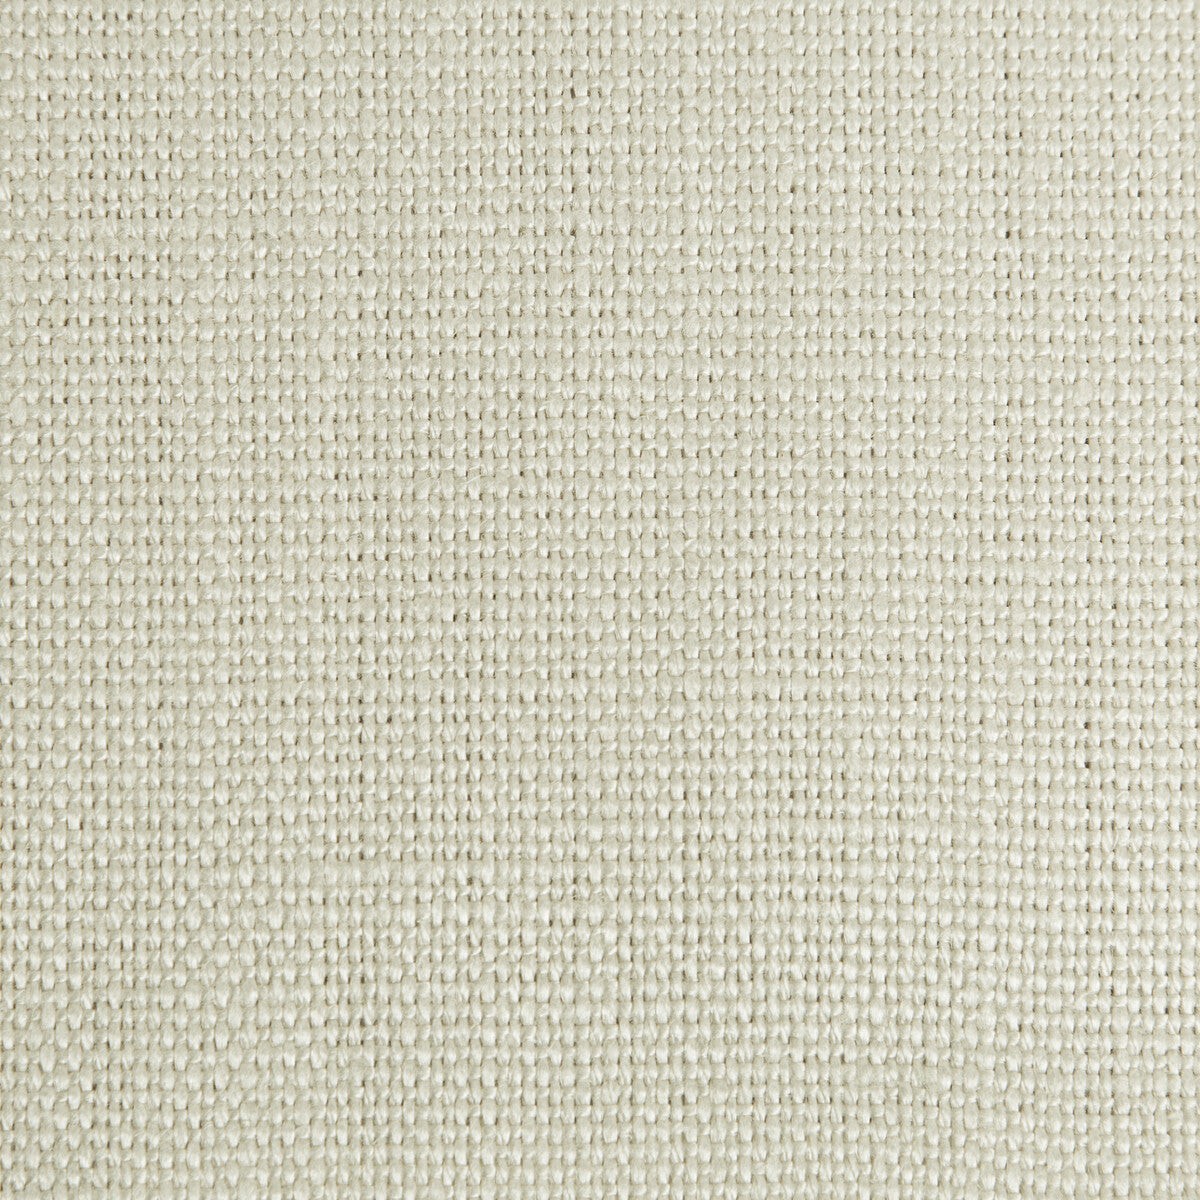 Stone Harbor fabric in moonlight color - pattern 27591.1101.0 - by Kravet Basics in the The Complete Linen IV collection